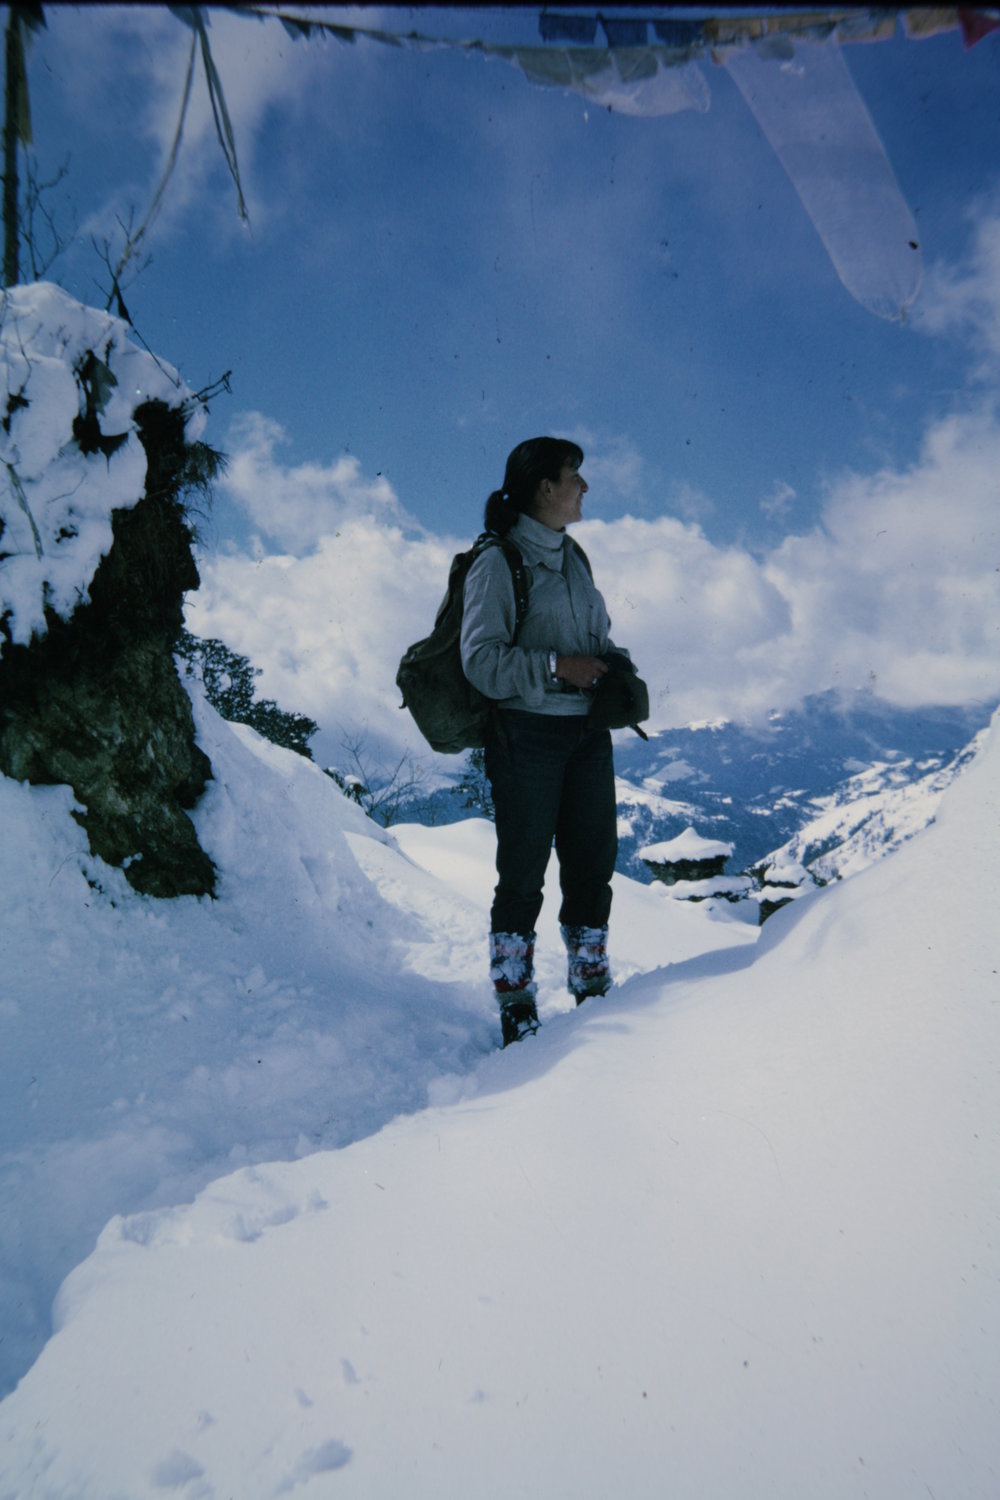 In the winter of 1969, Aziz moved among Sherpa villages, crossing passes like this at Ringmo in Solo before deciding on a nearby research site where she would spend an uninterrupted 11 months.